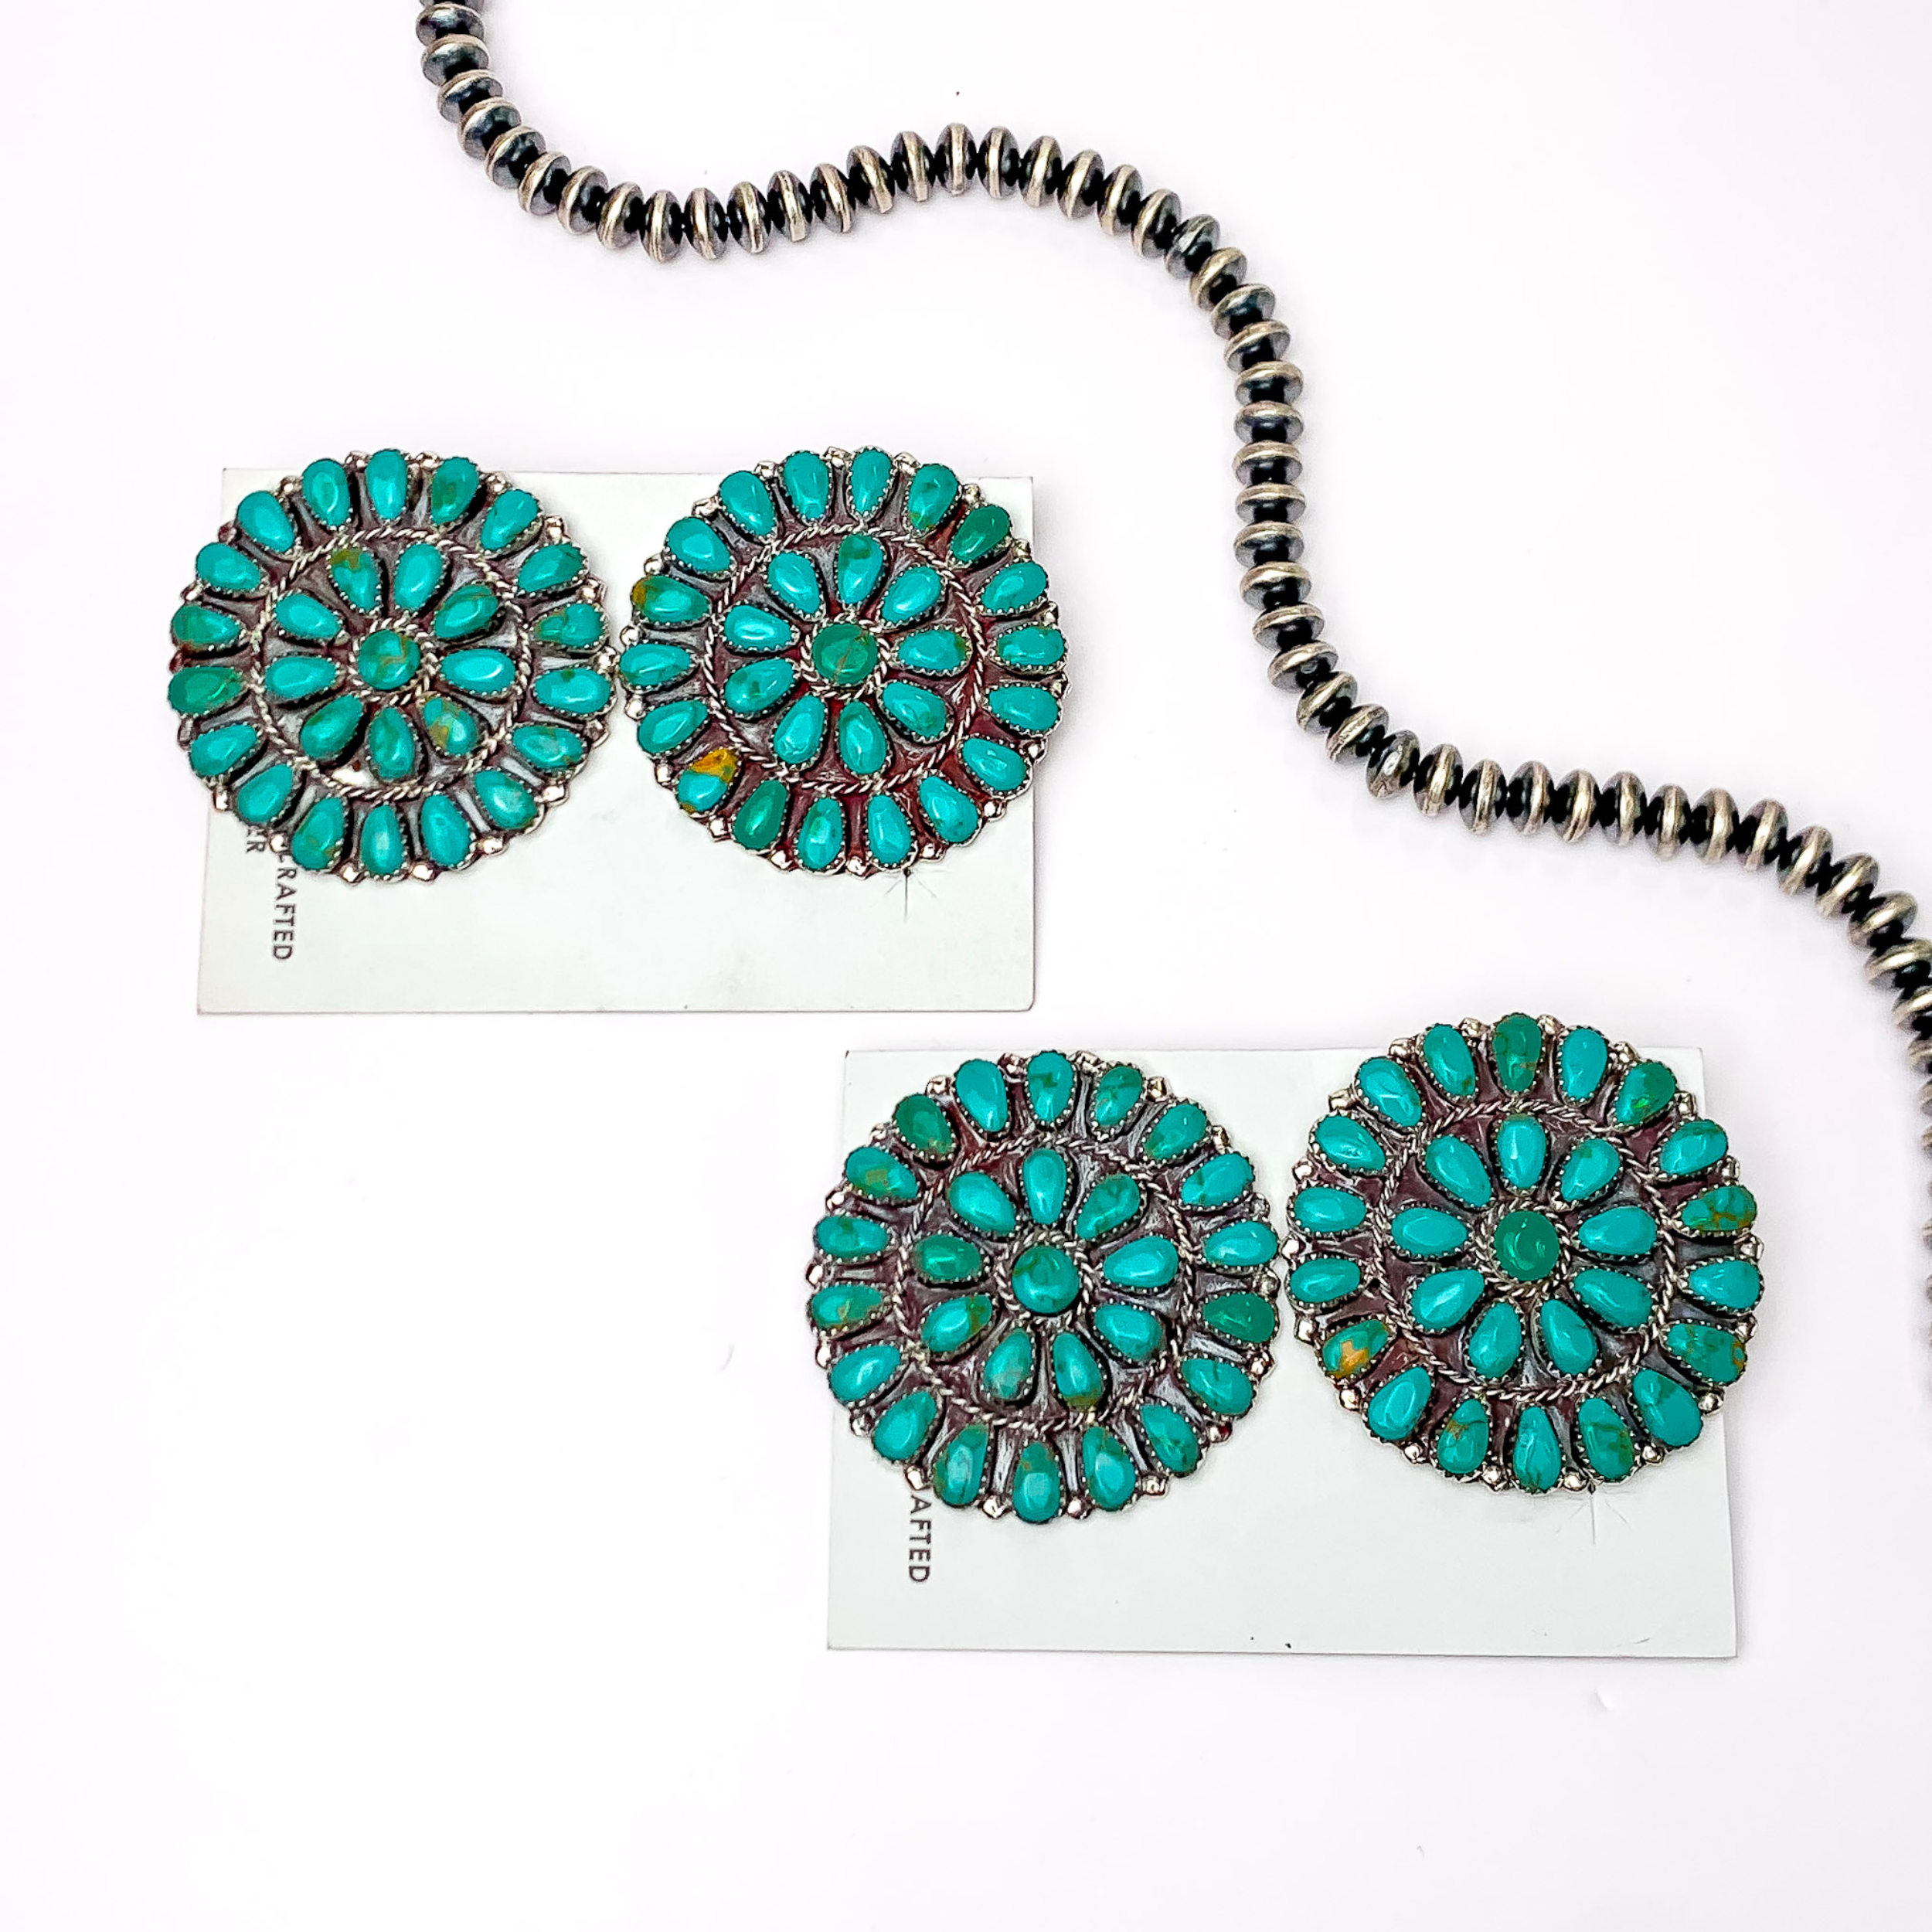 centered in the picture are turquoise earrings in a circle cluster shape with a white background.